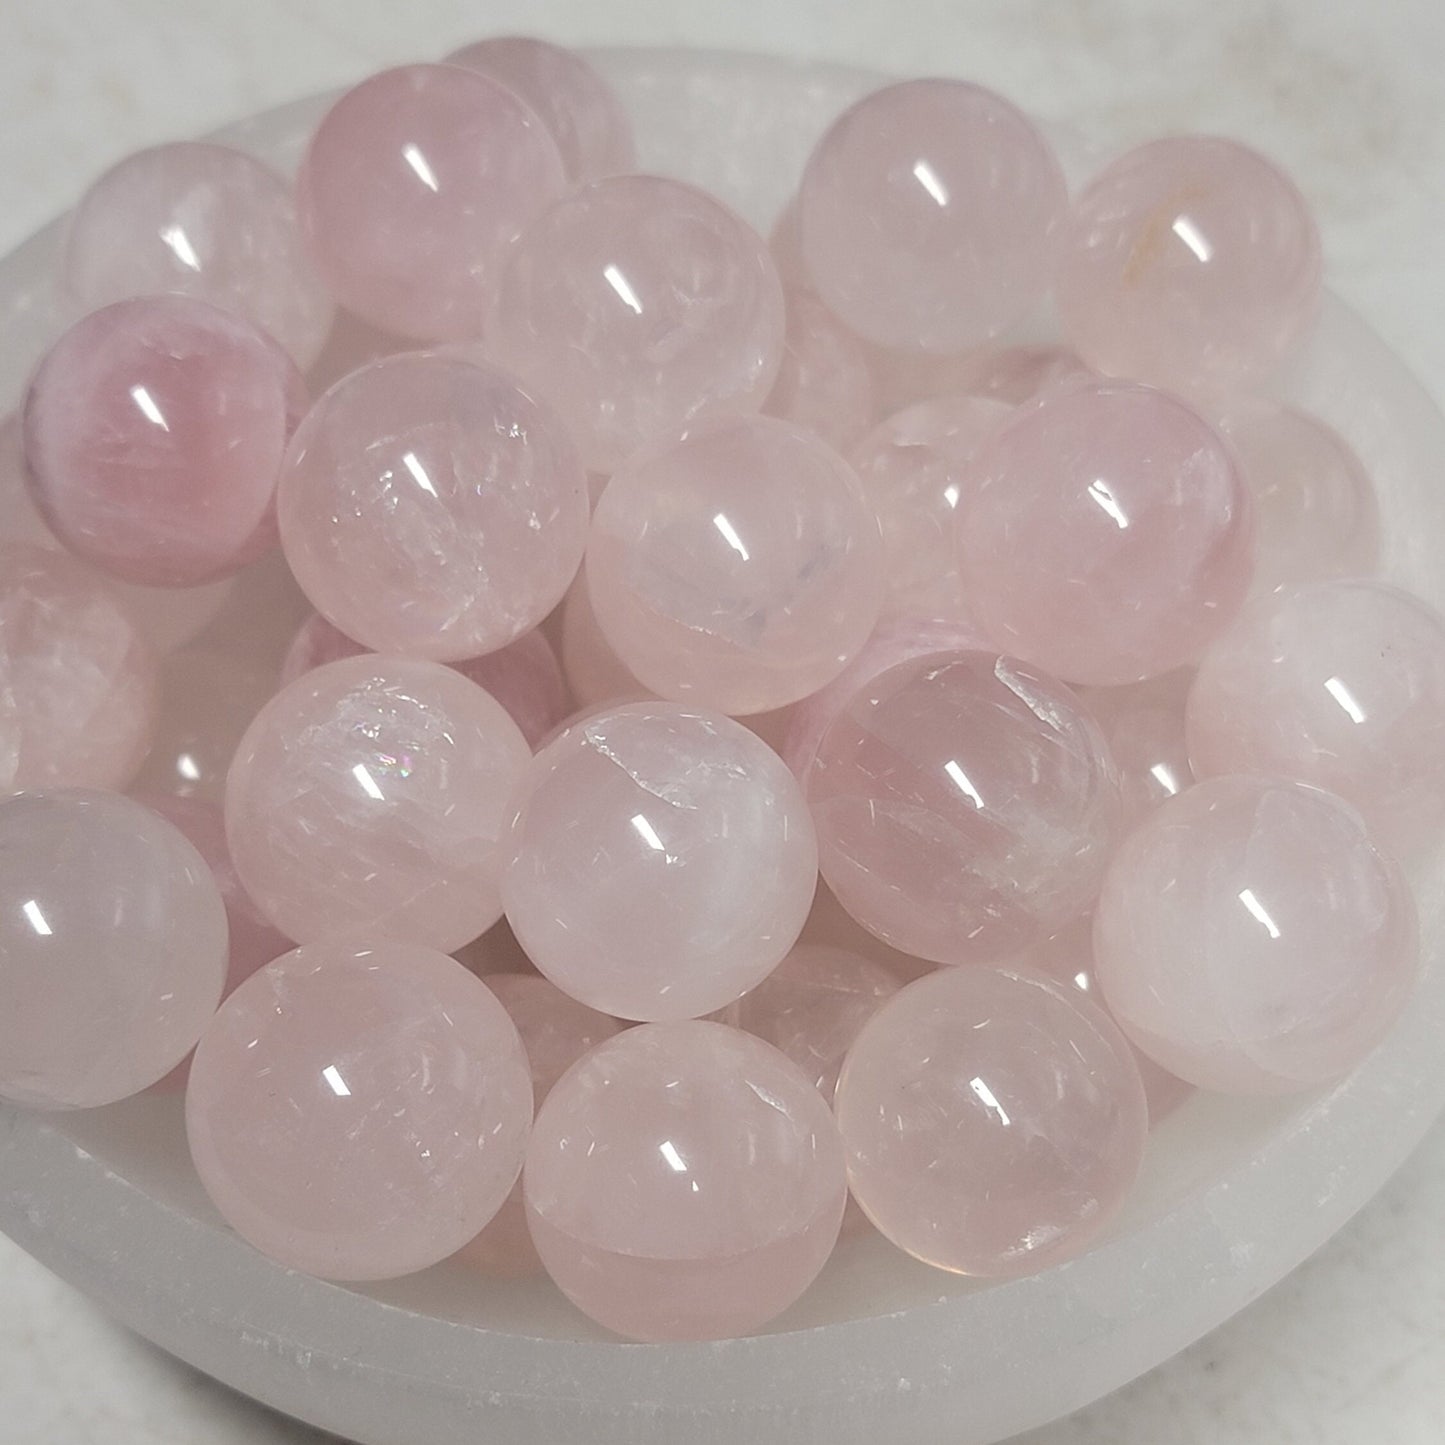 Rose Quartz, Polished Crystal Spheres (Approx 3/4") Polished Stone for the Heart Chakra, for Wire Wrapping or Crystal Grid Supply BIN-0287